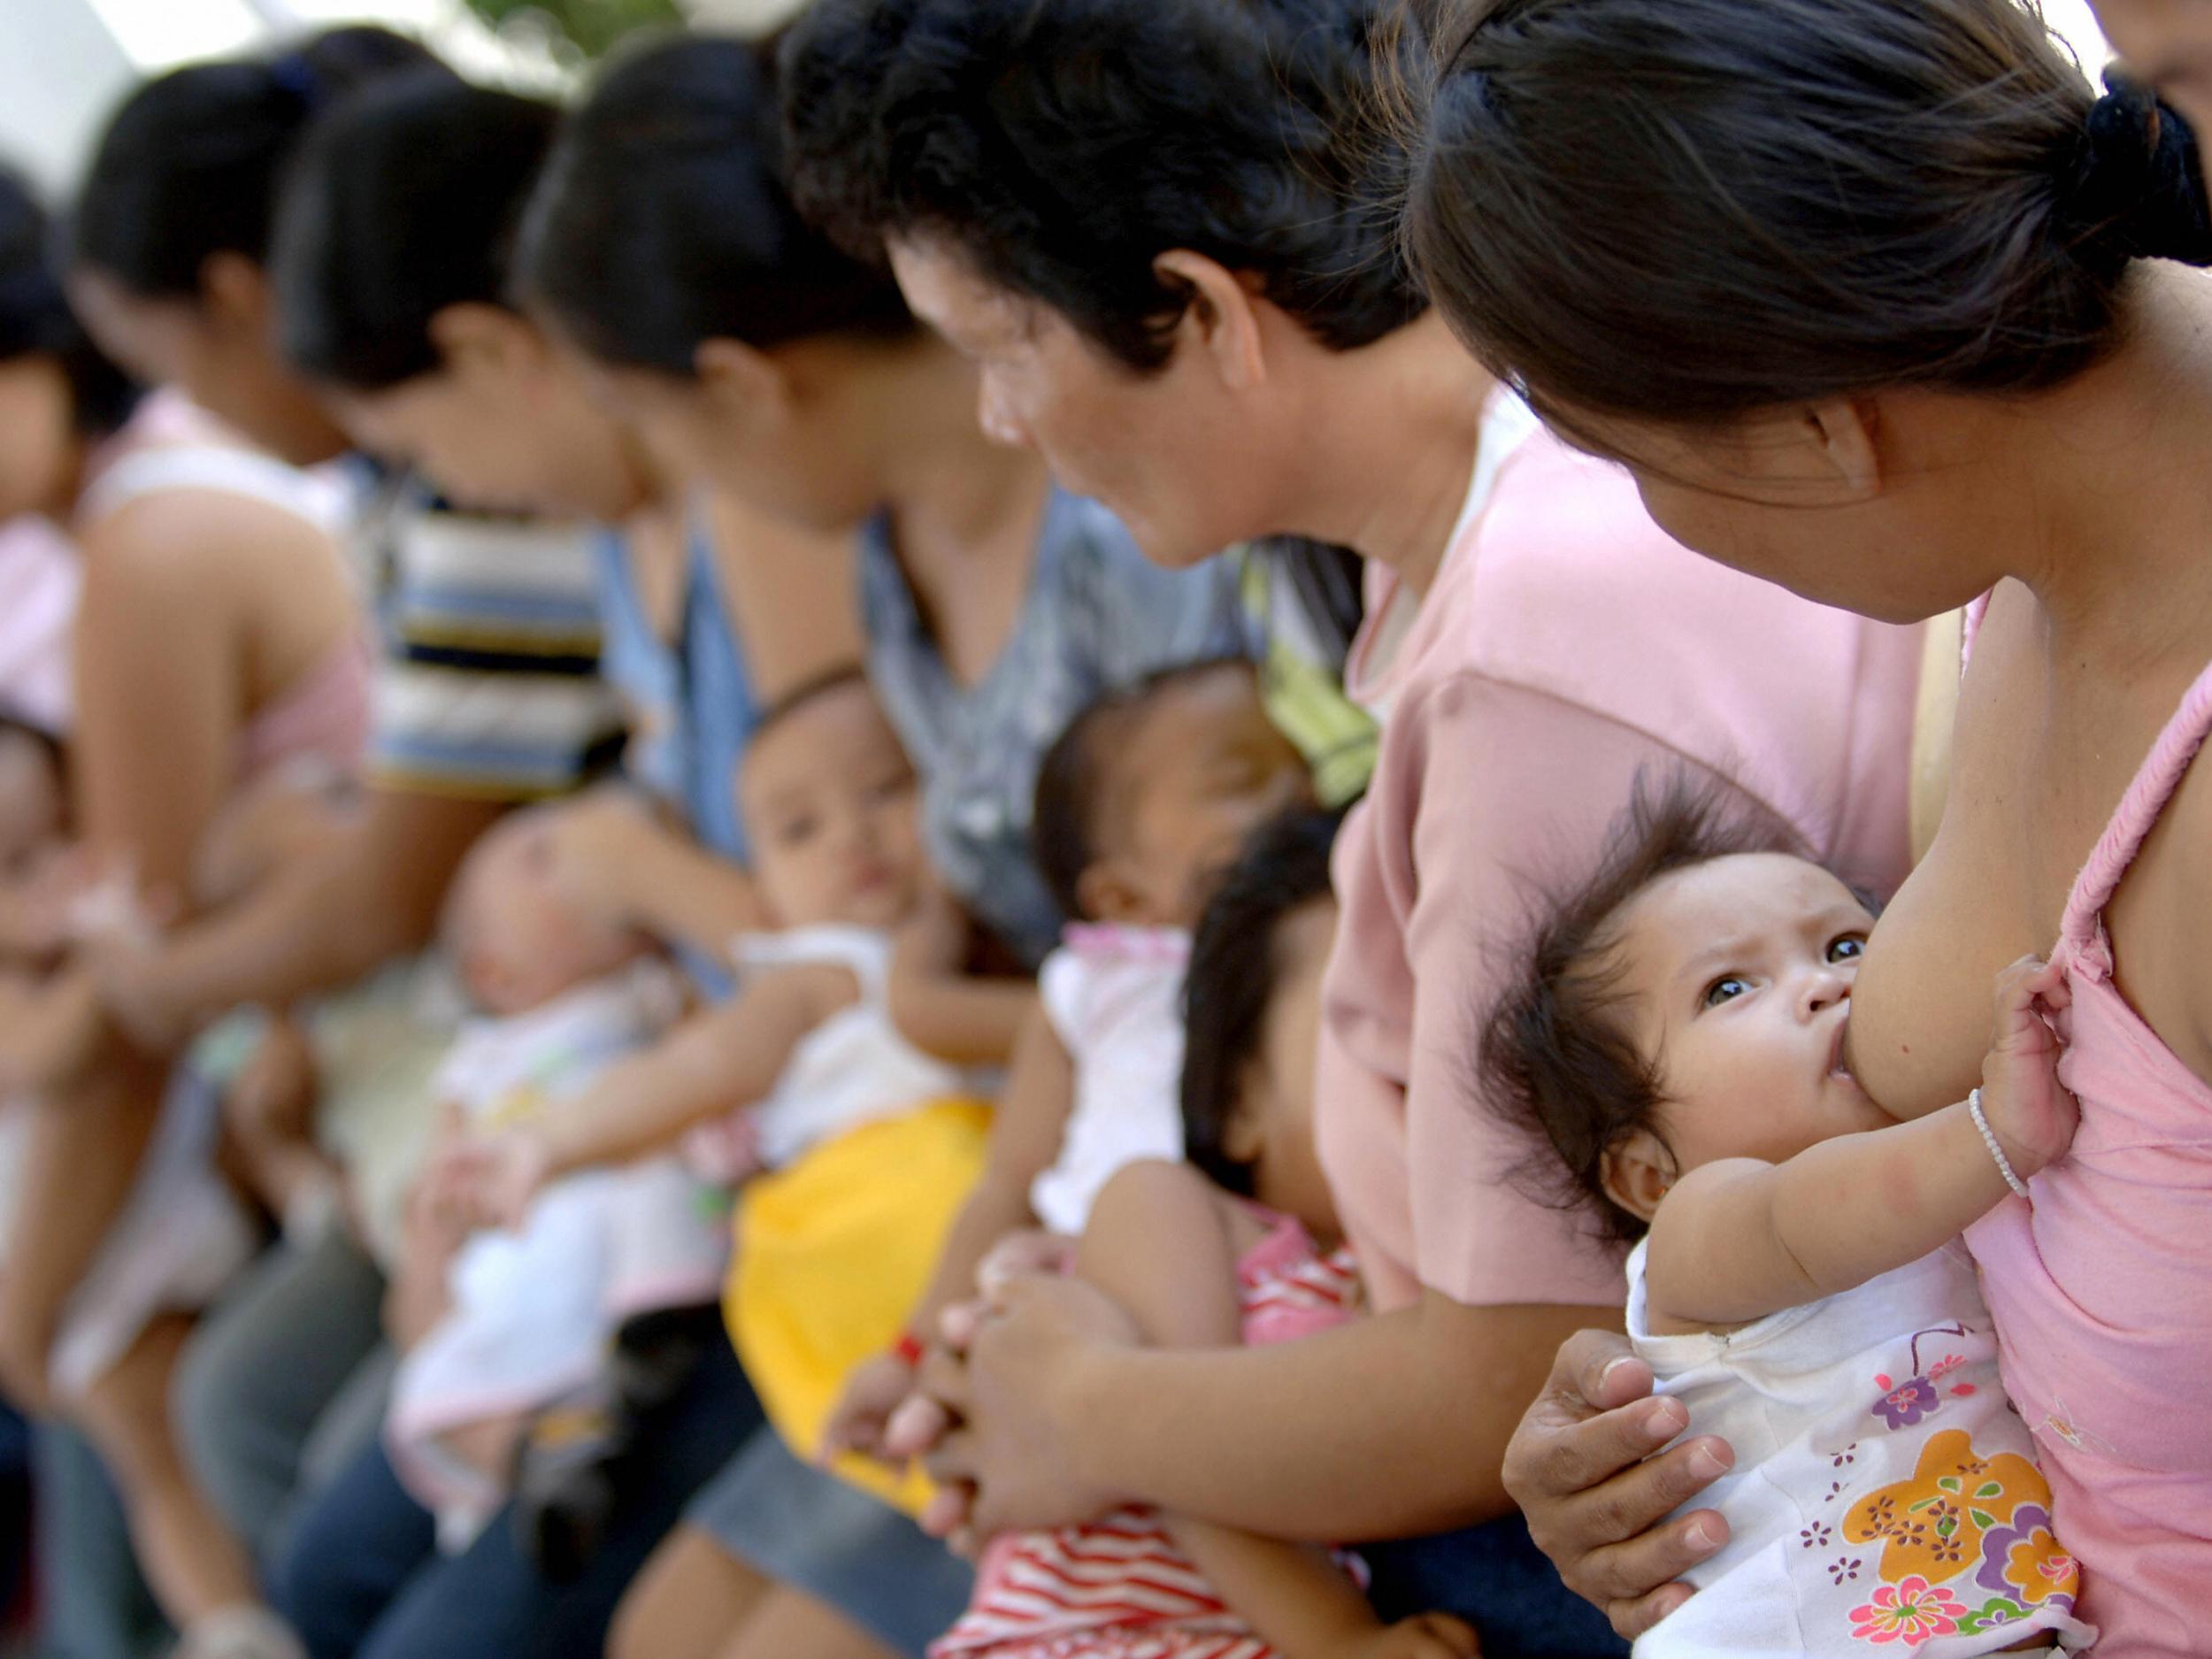 Manila, PHILIPPINES: Mothers engage in mass breastfeeding to promote the practice which, according to the government and Unicef, is safer and healthier than bottle-feeding